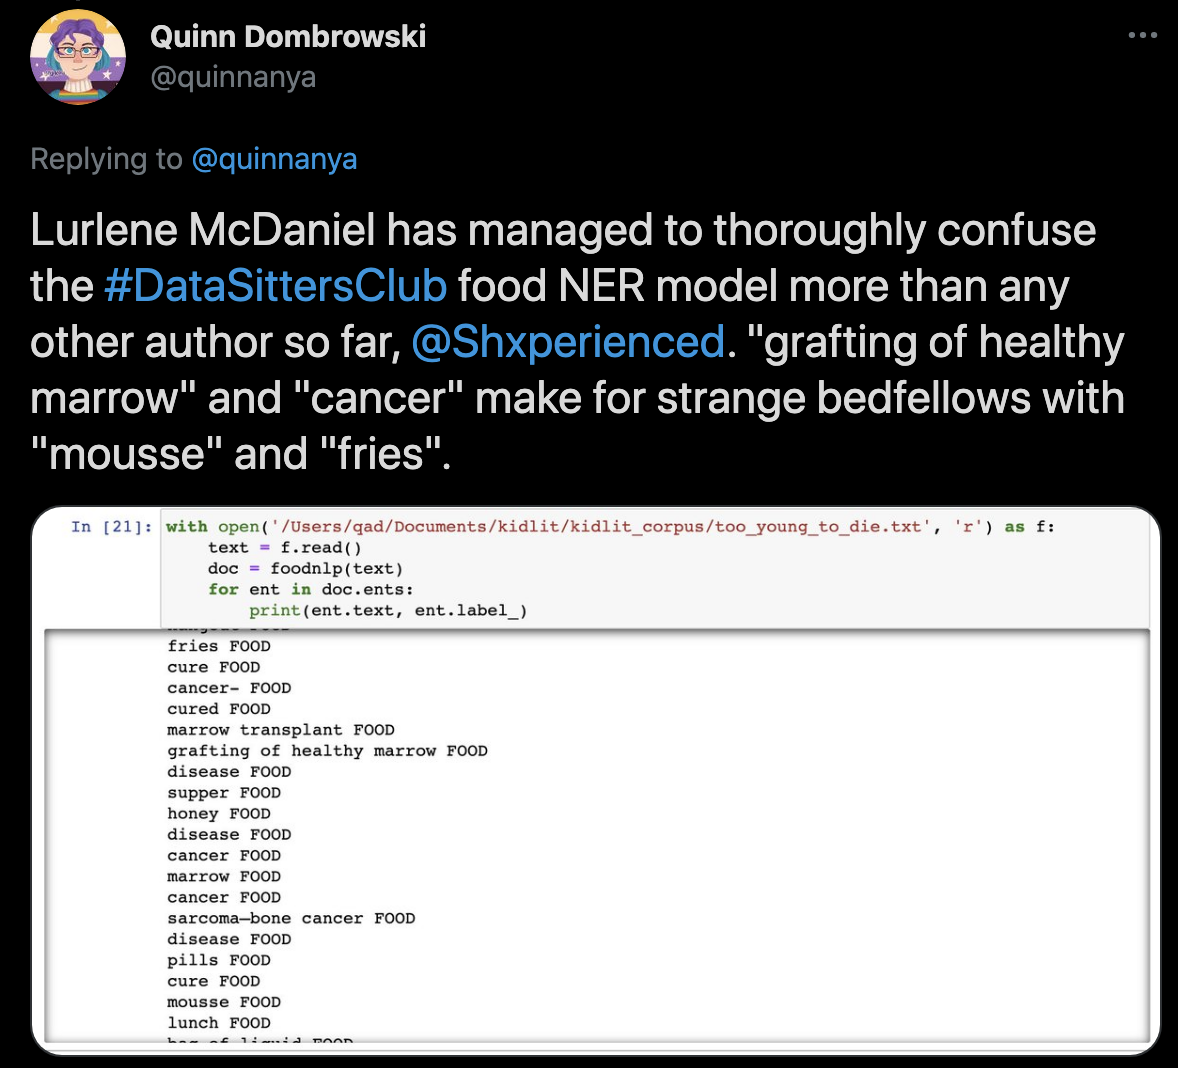 A tweet with NER results from Lurlene McDaniel